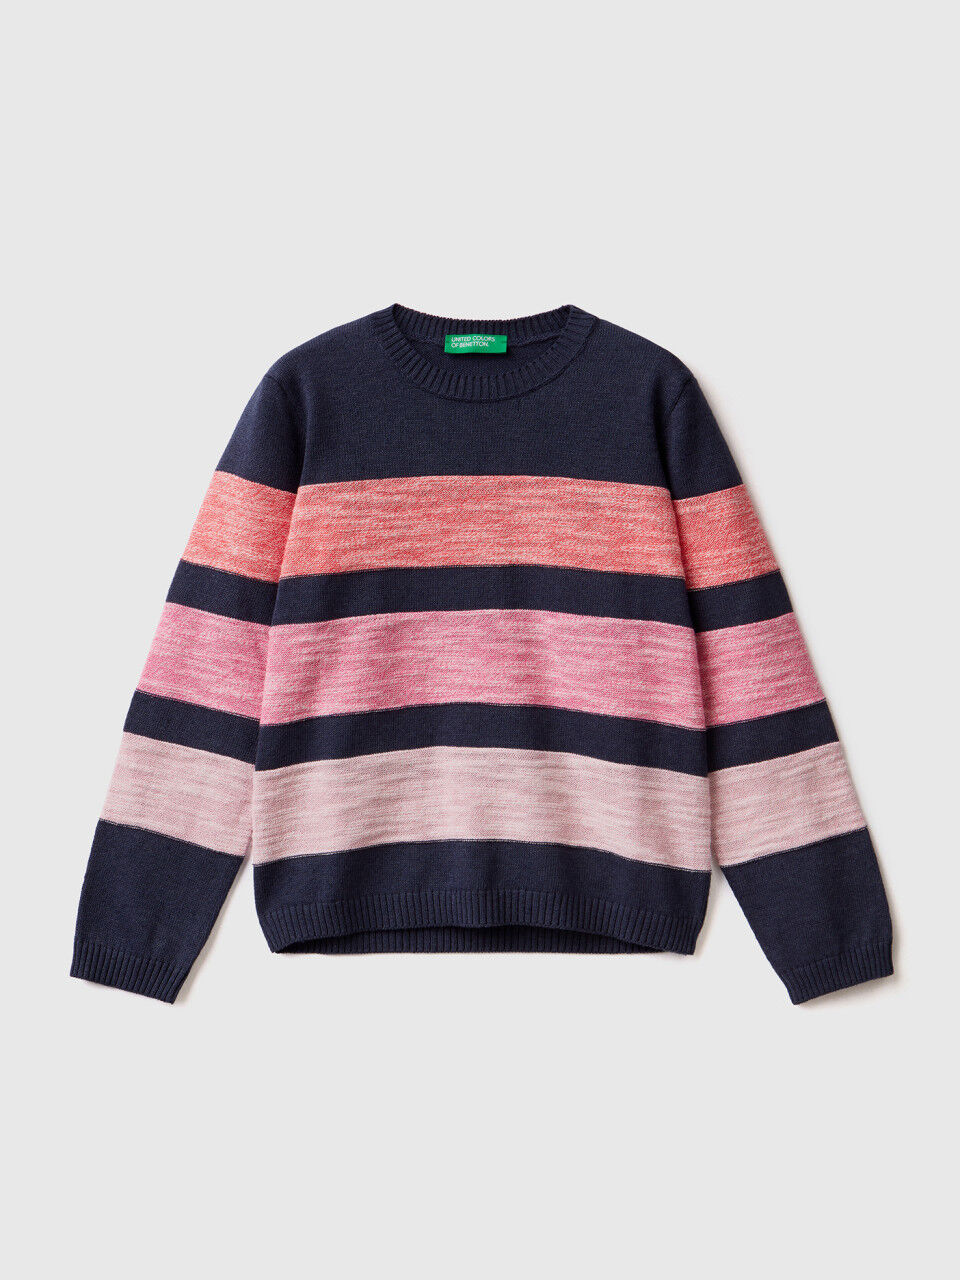 Striped sweater in cotton blend